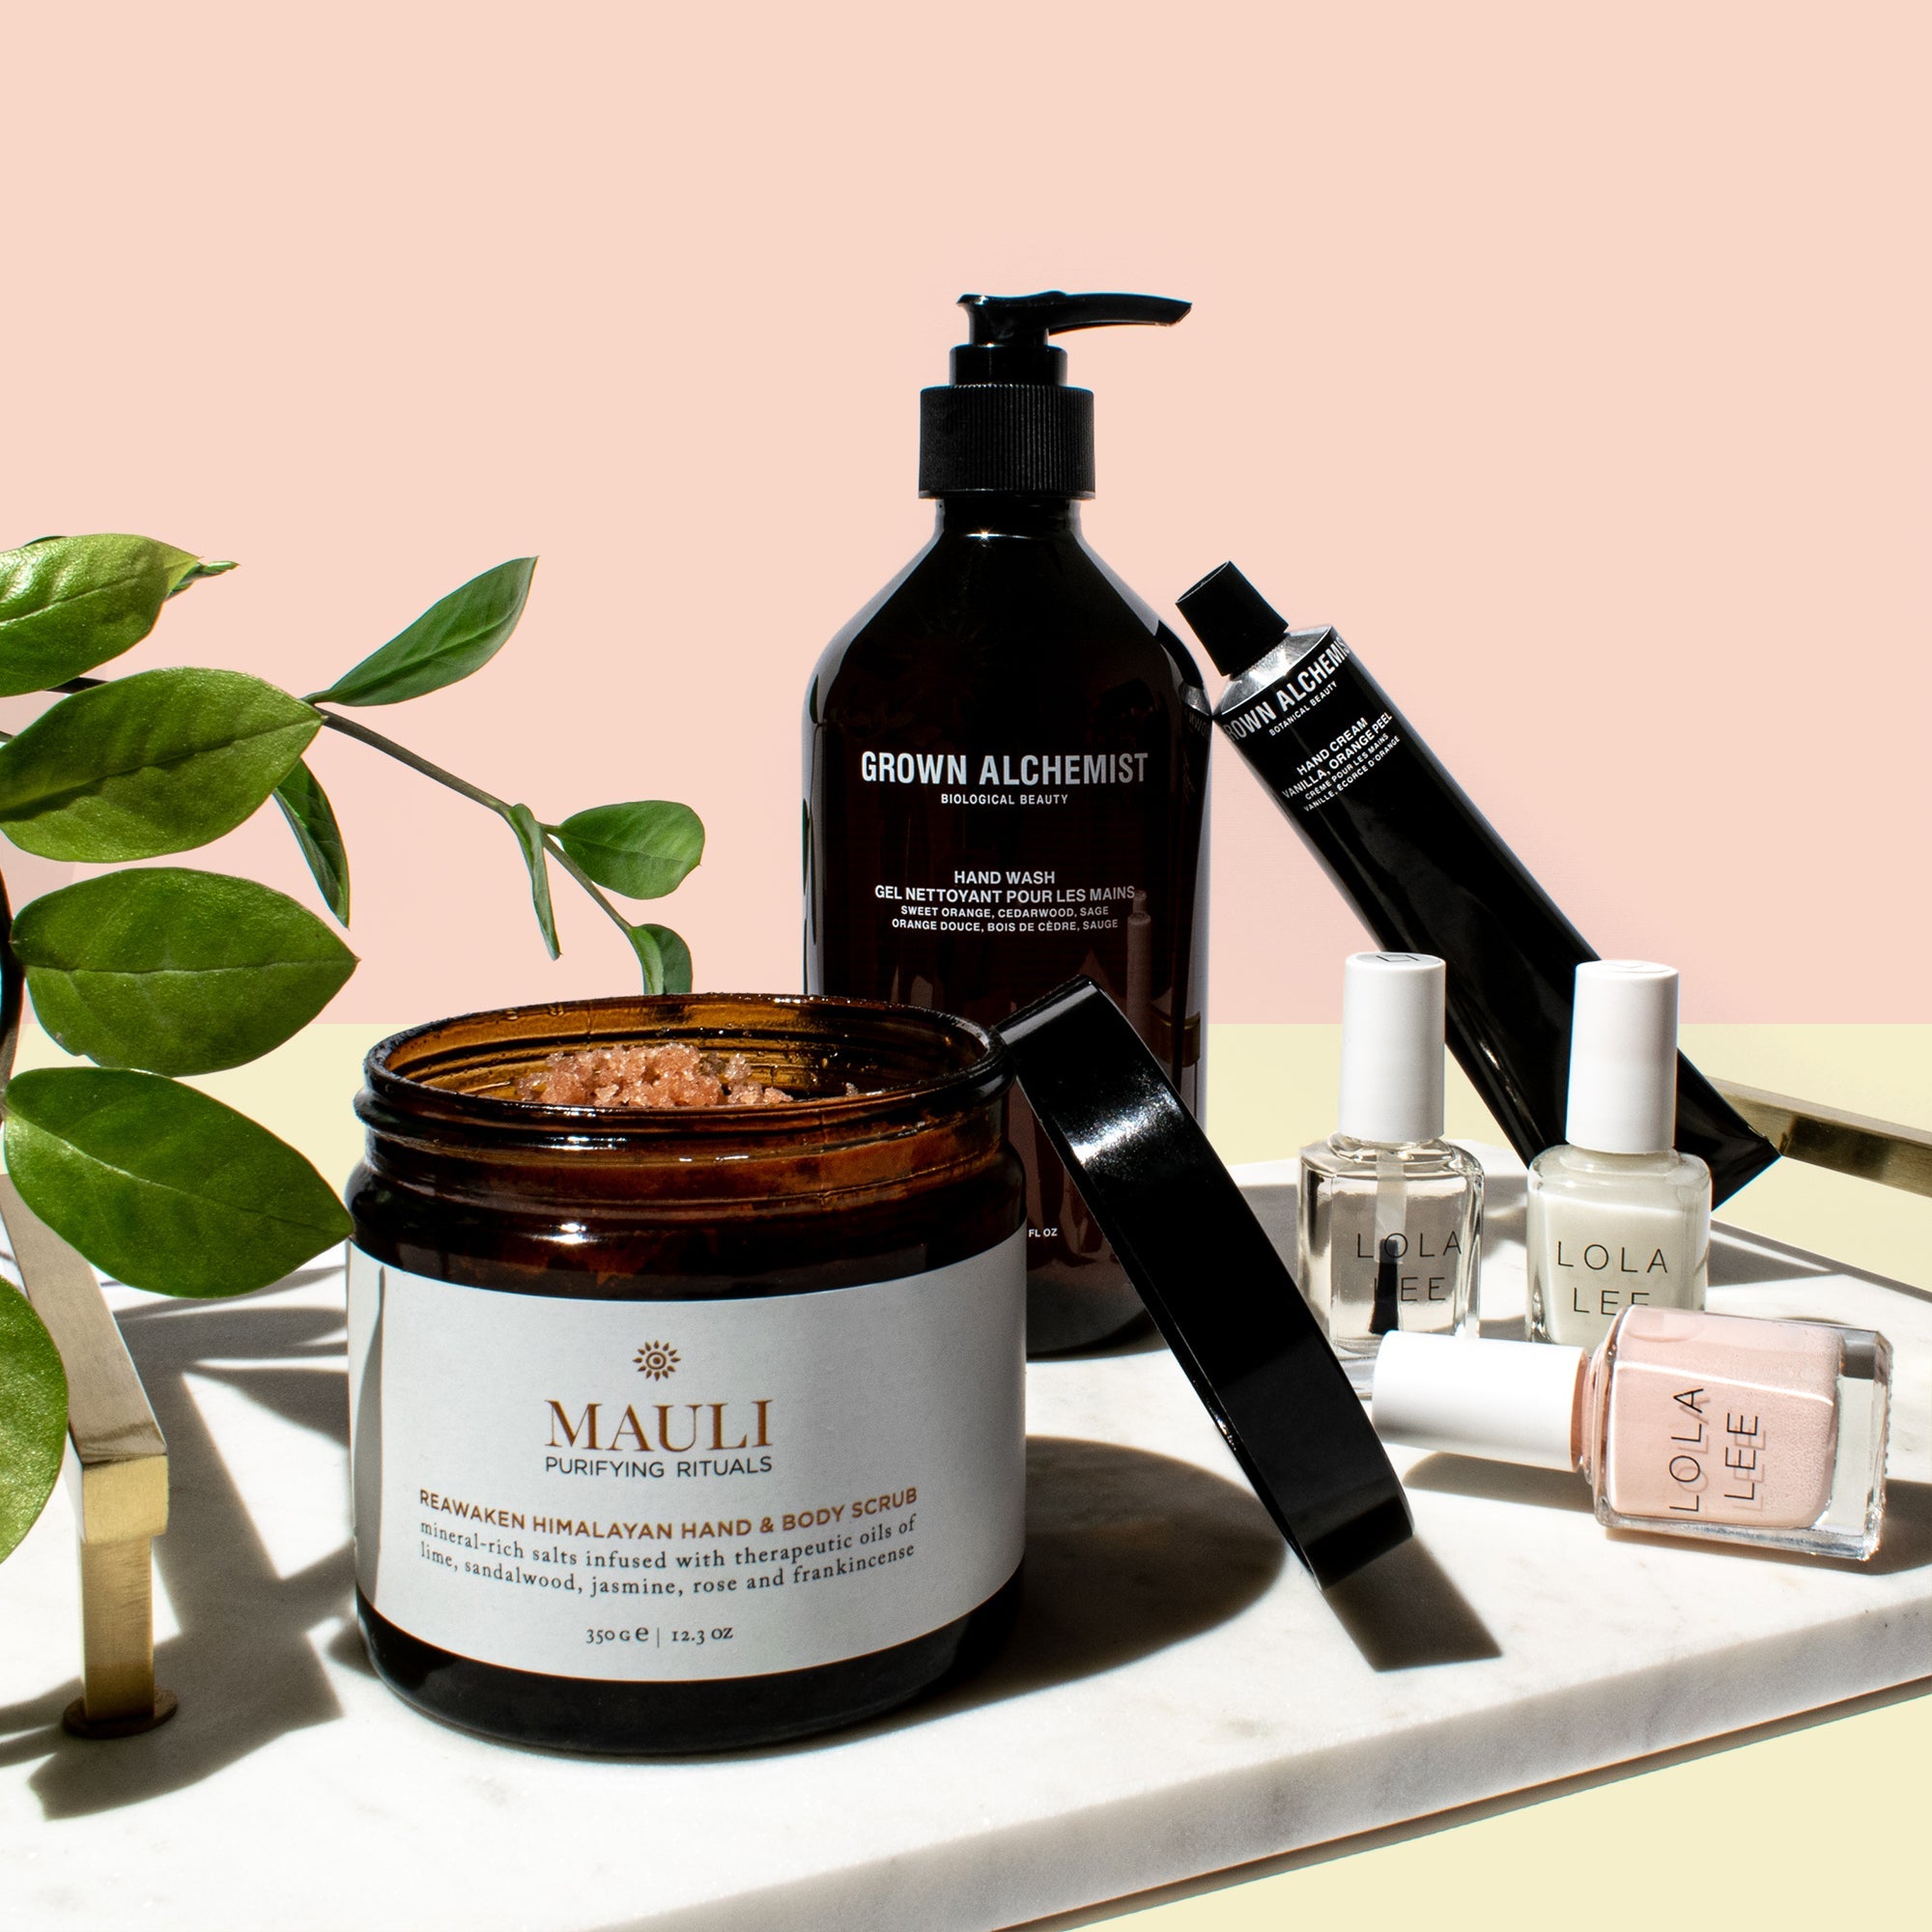 7 Clean Beauty Products You Should Switch To In 2021 - Secret Skin